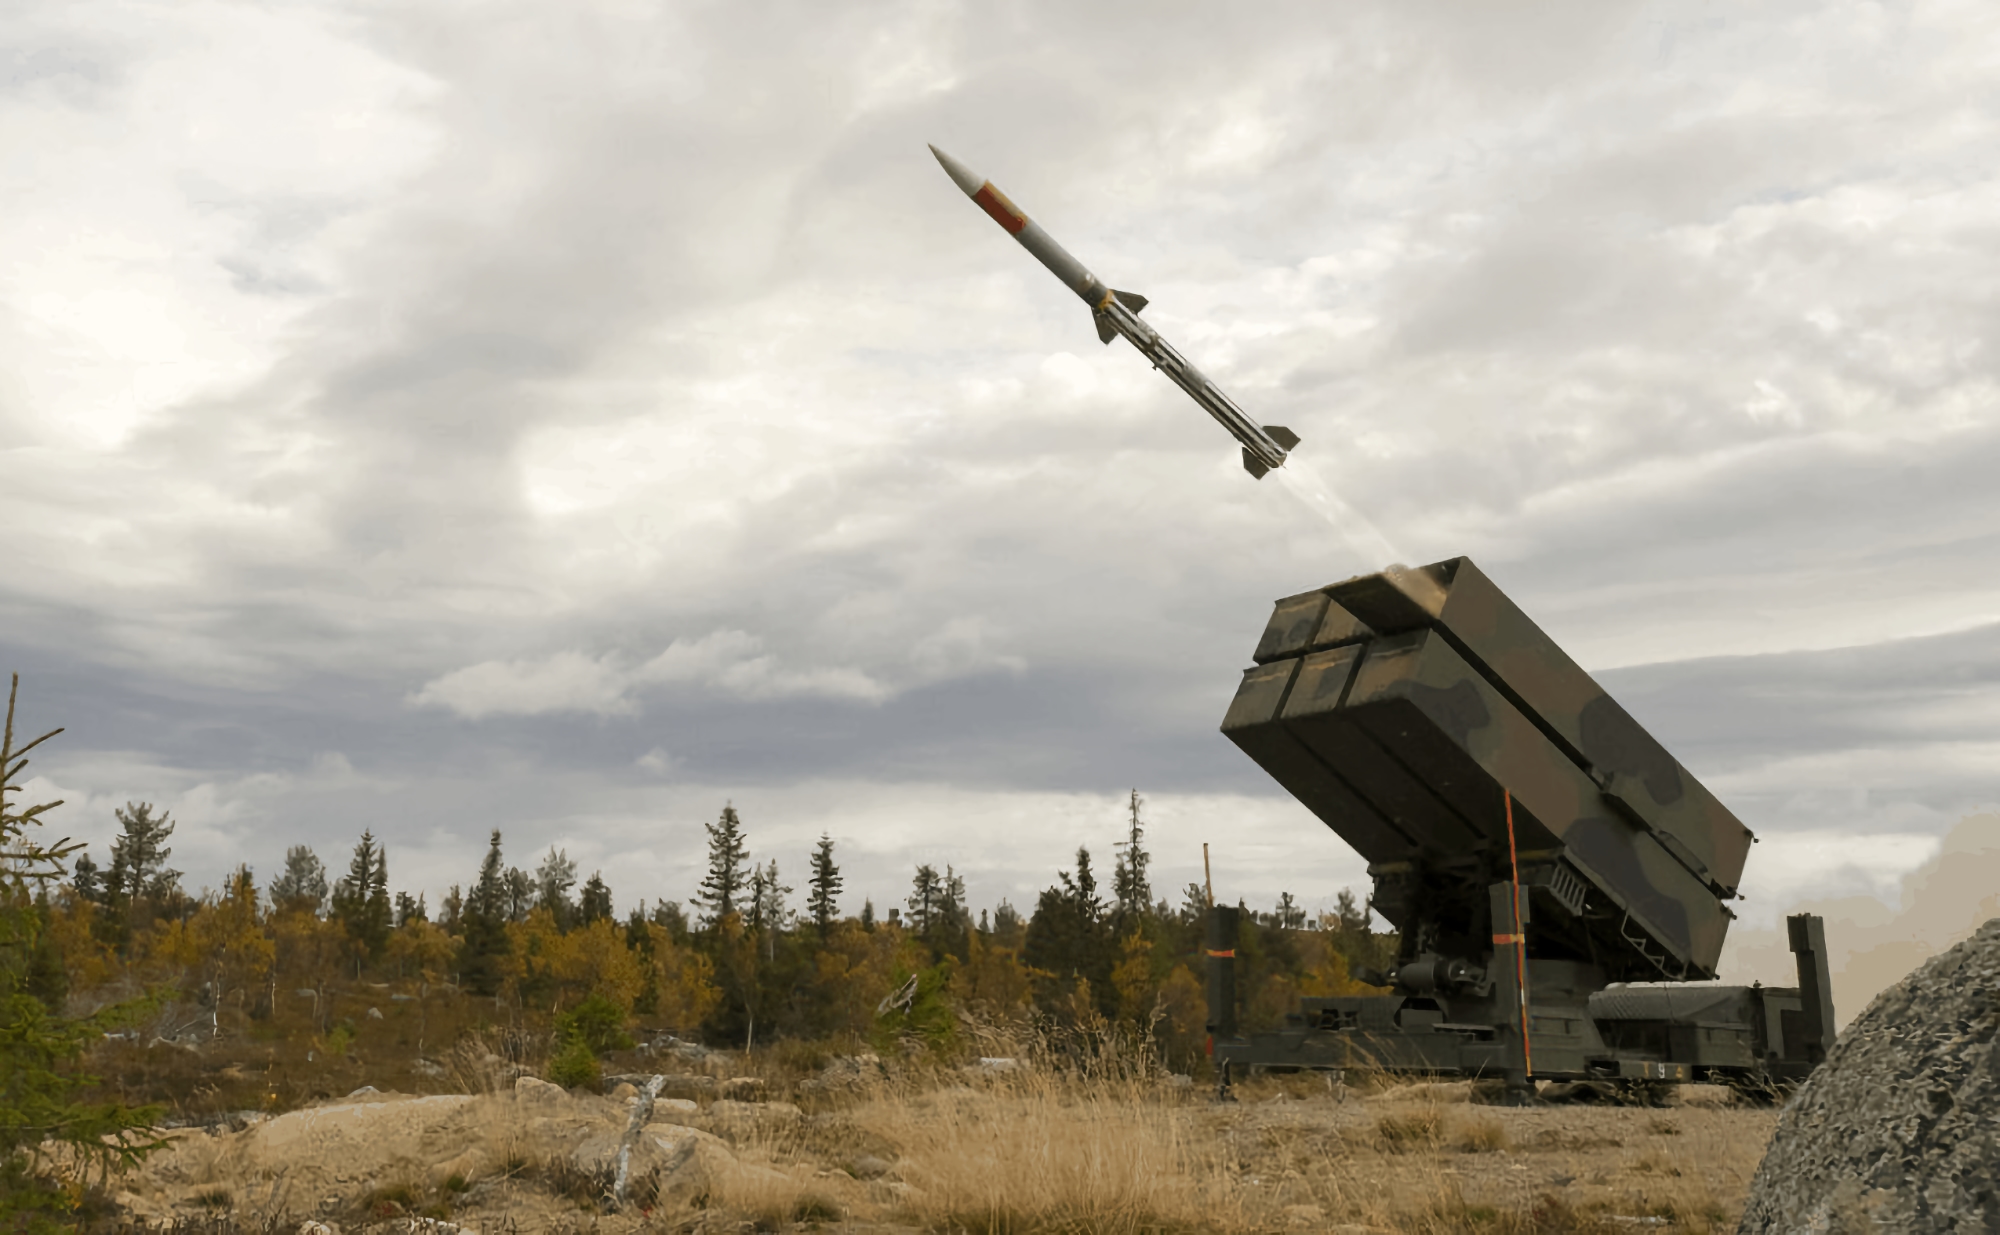 Ammunition for HIMARS, NASAMS, 1,000 Javelins and 50 M113 APCs: U.S. announced $1,000,000,000 new military aid for Ukraine